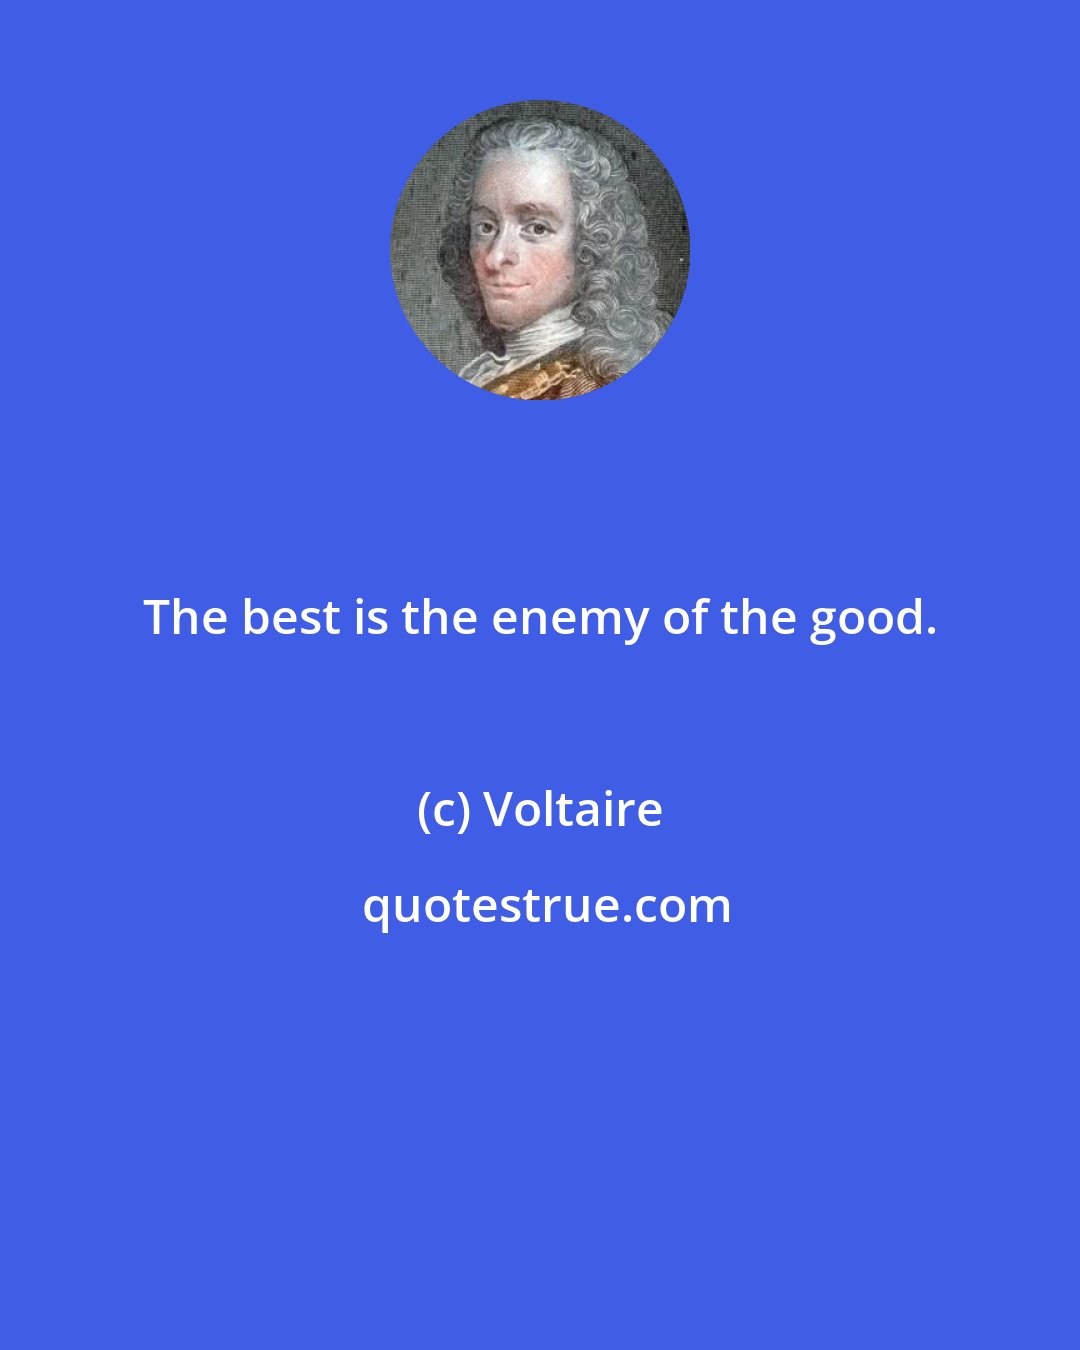 Voltaire: The best is the enemy of the good.